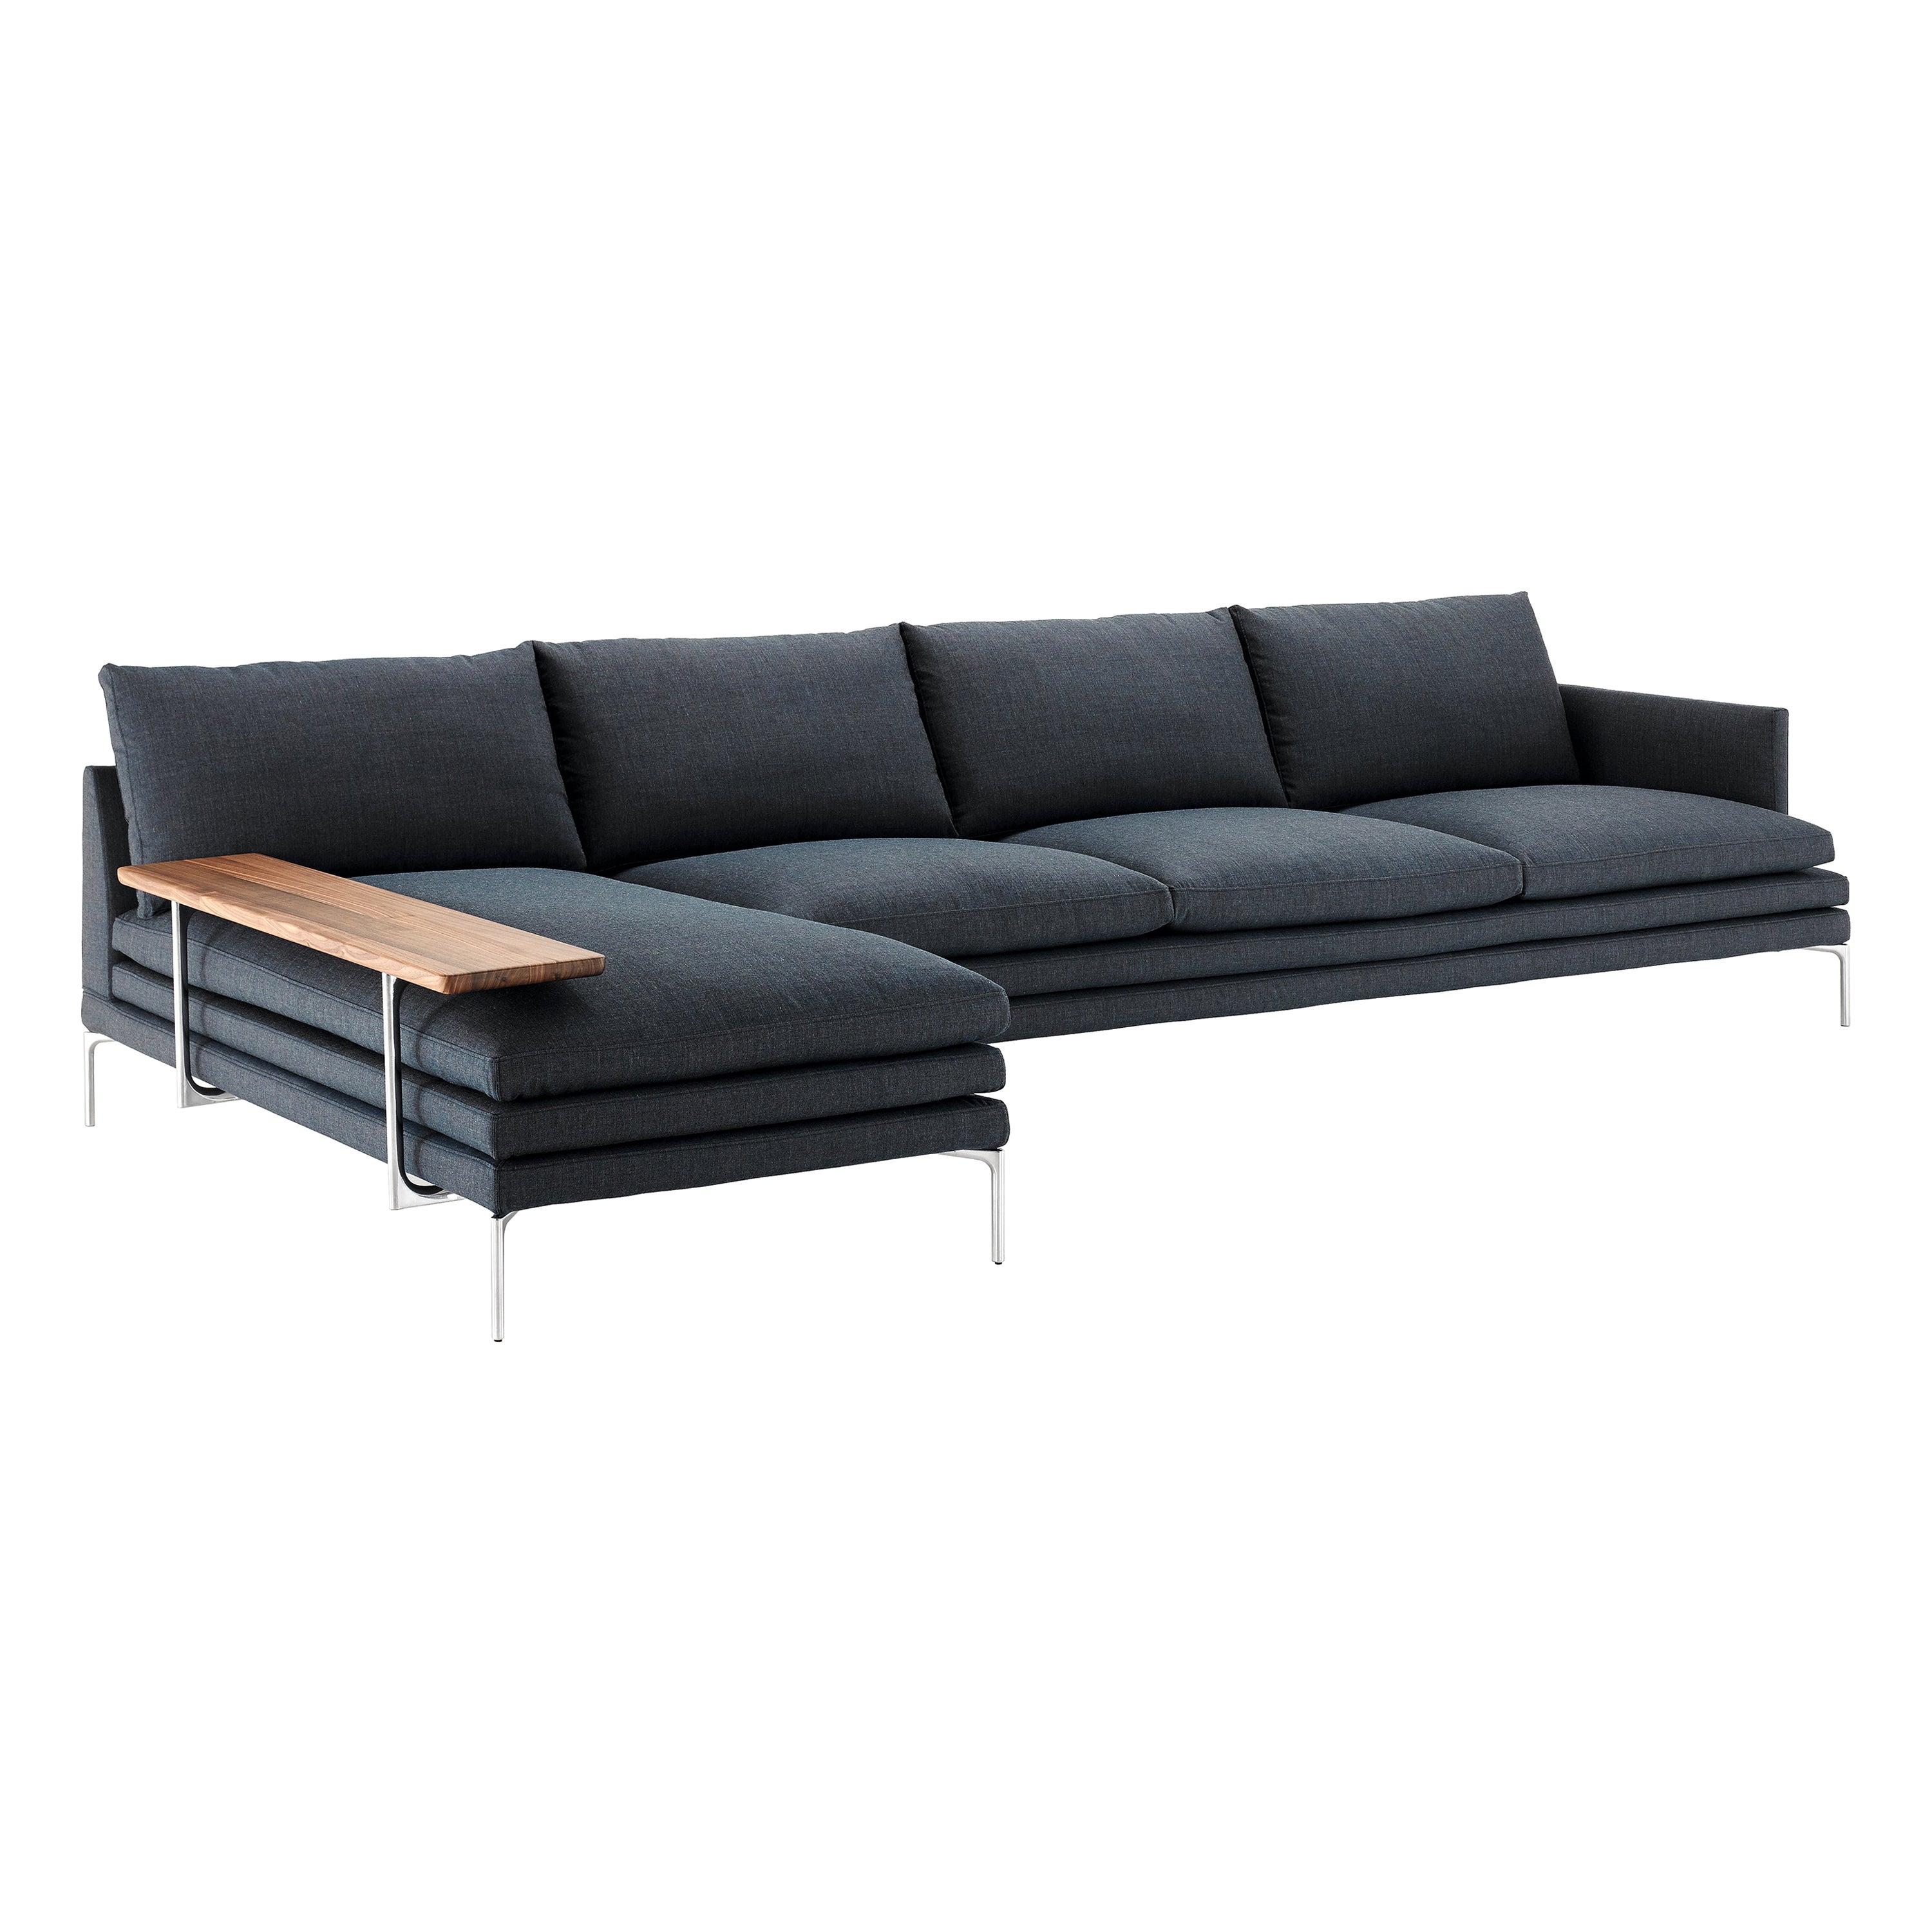 Zanotta William Modular Sofa in Vins Fabric and Steel Frame by Damian Williamson For Sale